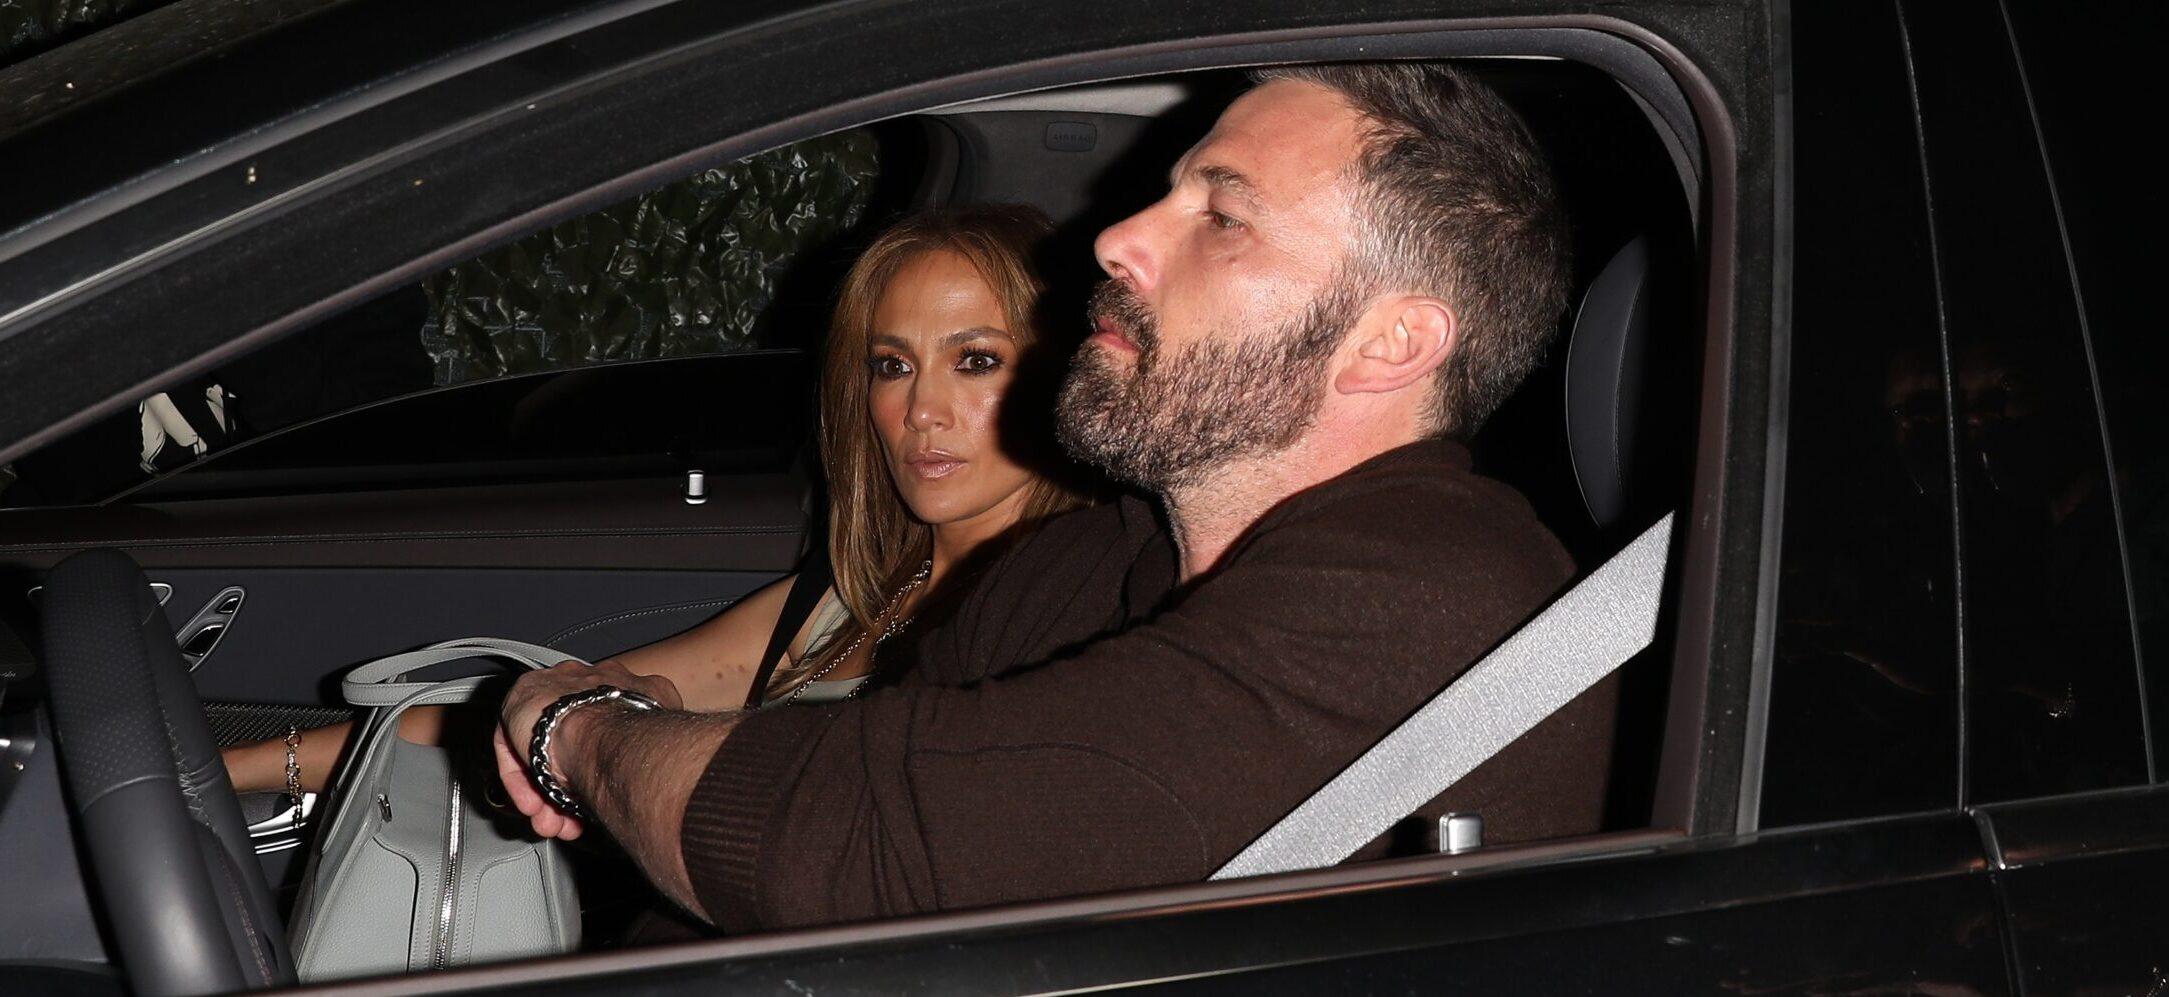 Ben Affleck And Jennifer Lopez Caught Having Another Tense Moment While Driving